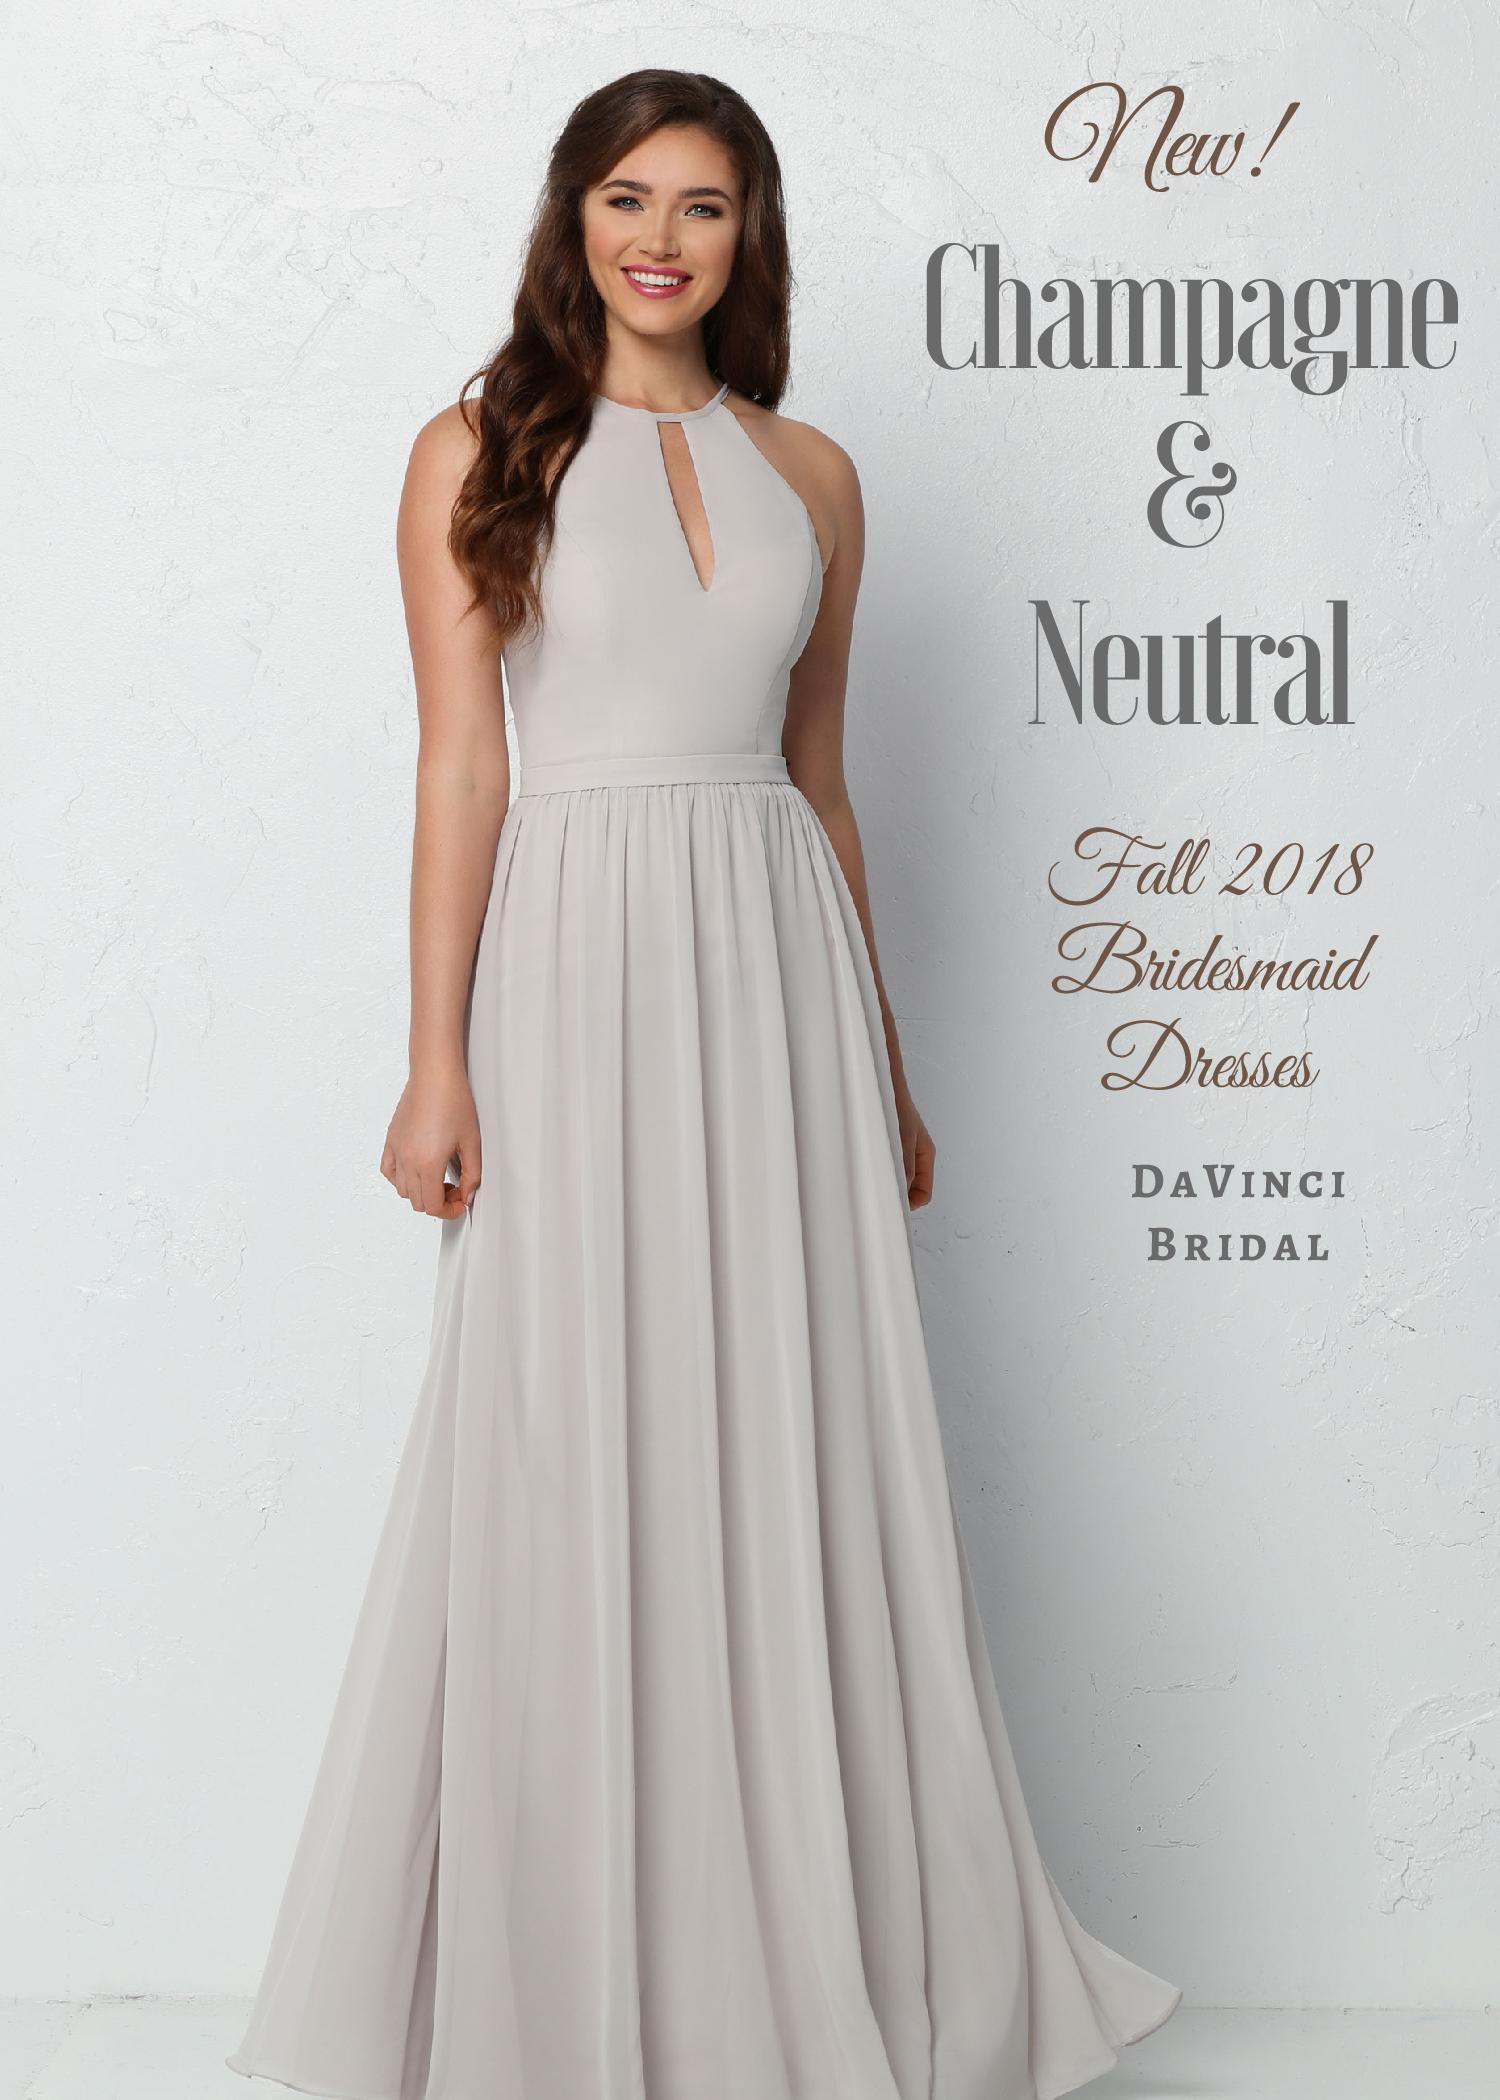 Champagne & Neutral Colored Bridesmaid Dresses - Fall 2018 DaVinci Bridal  Blog | DaVinci Bridal Blog